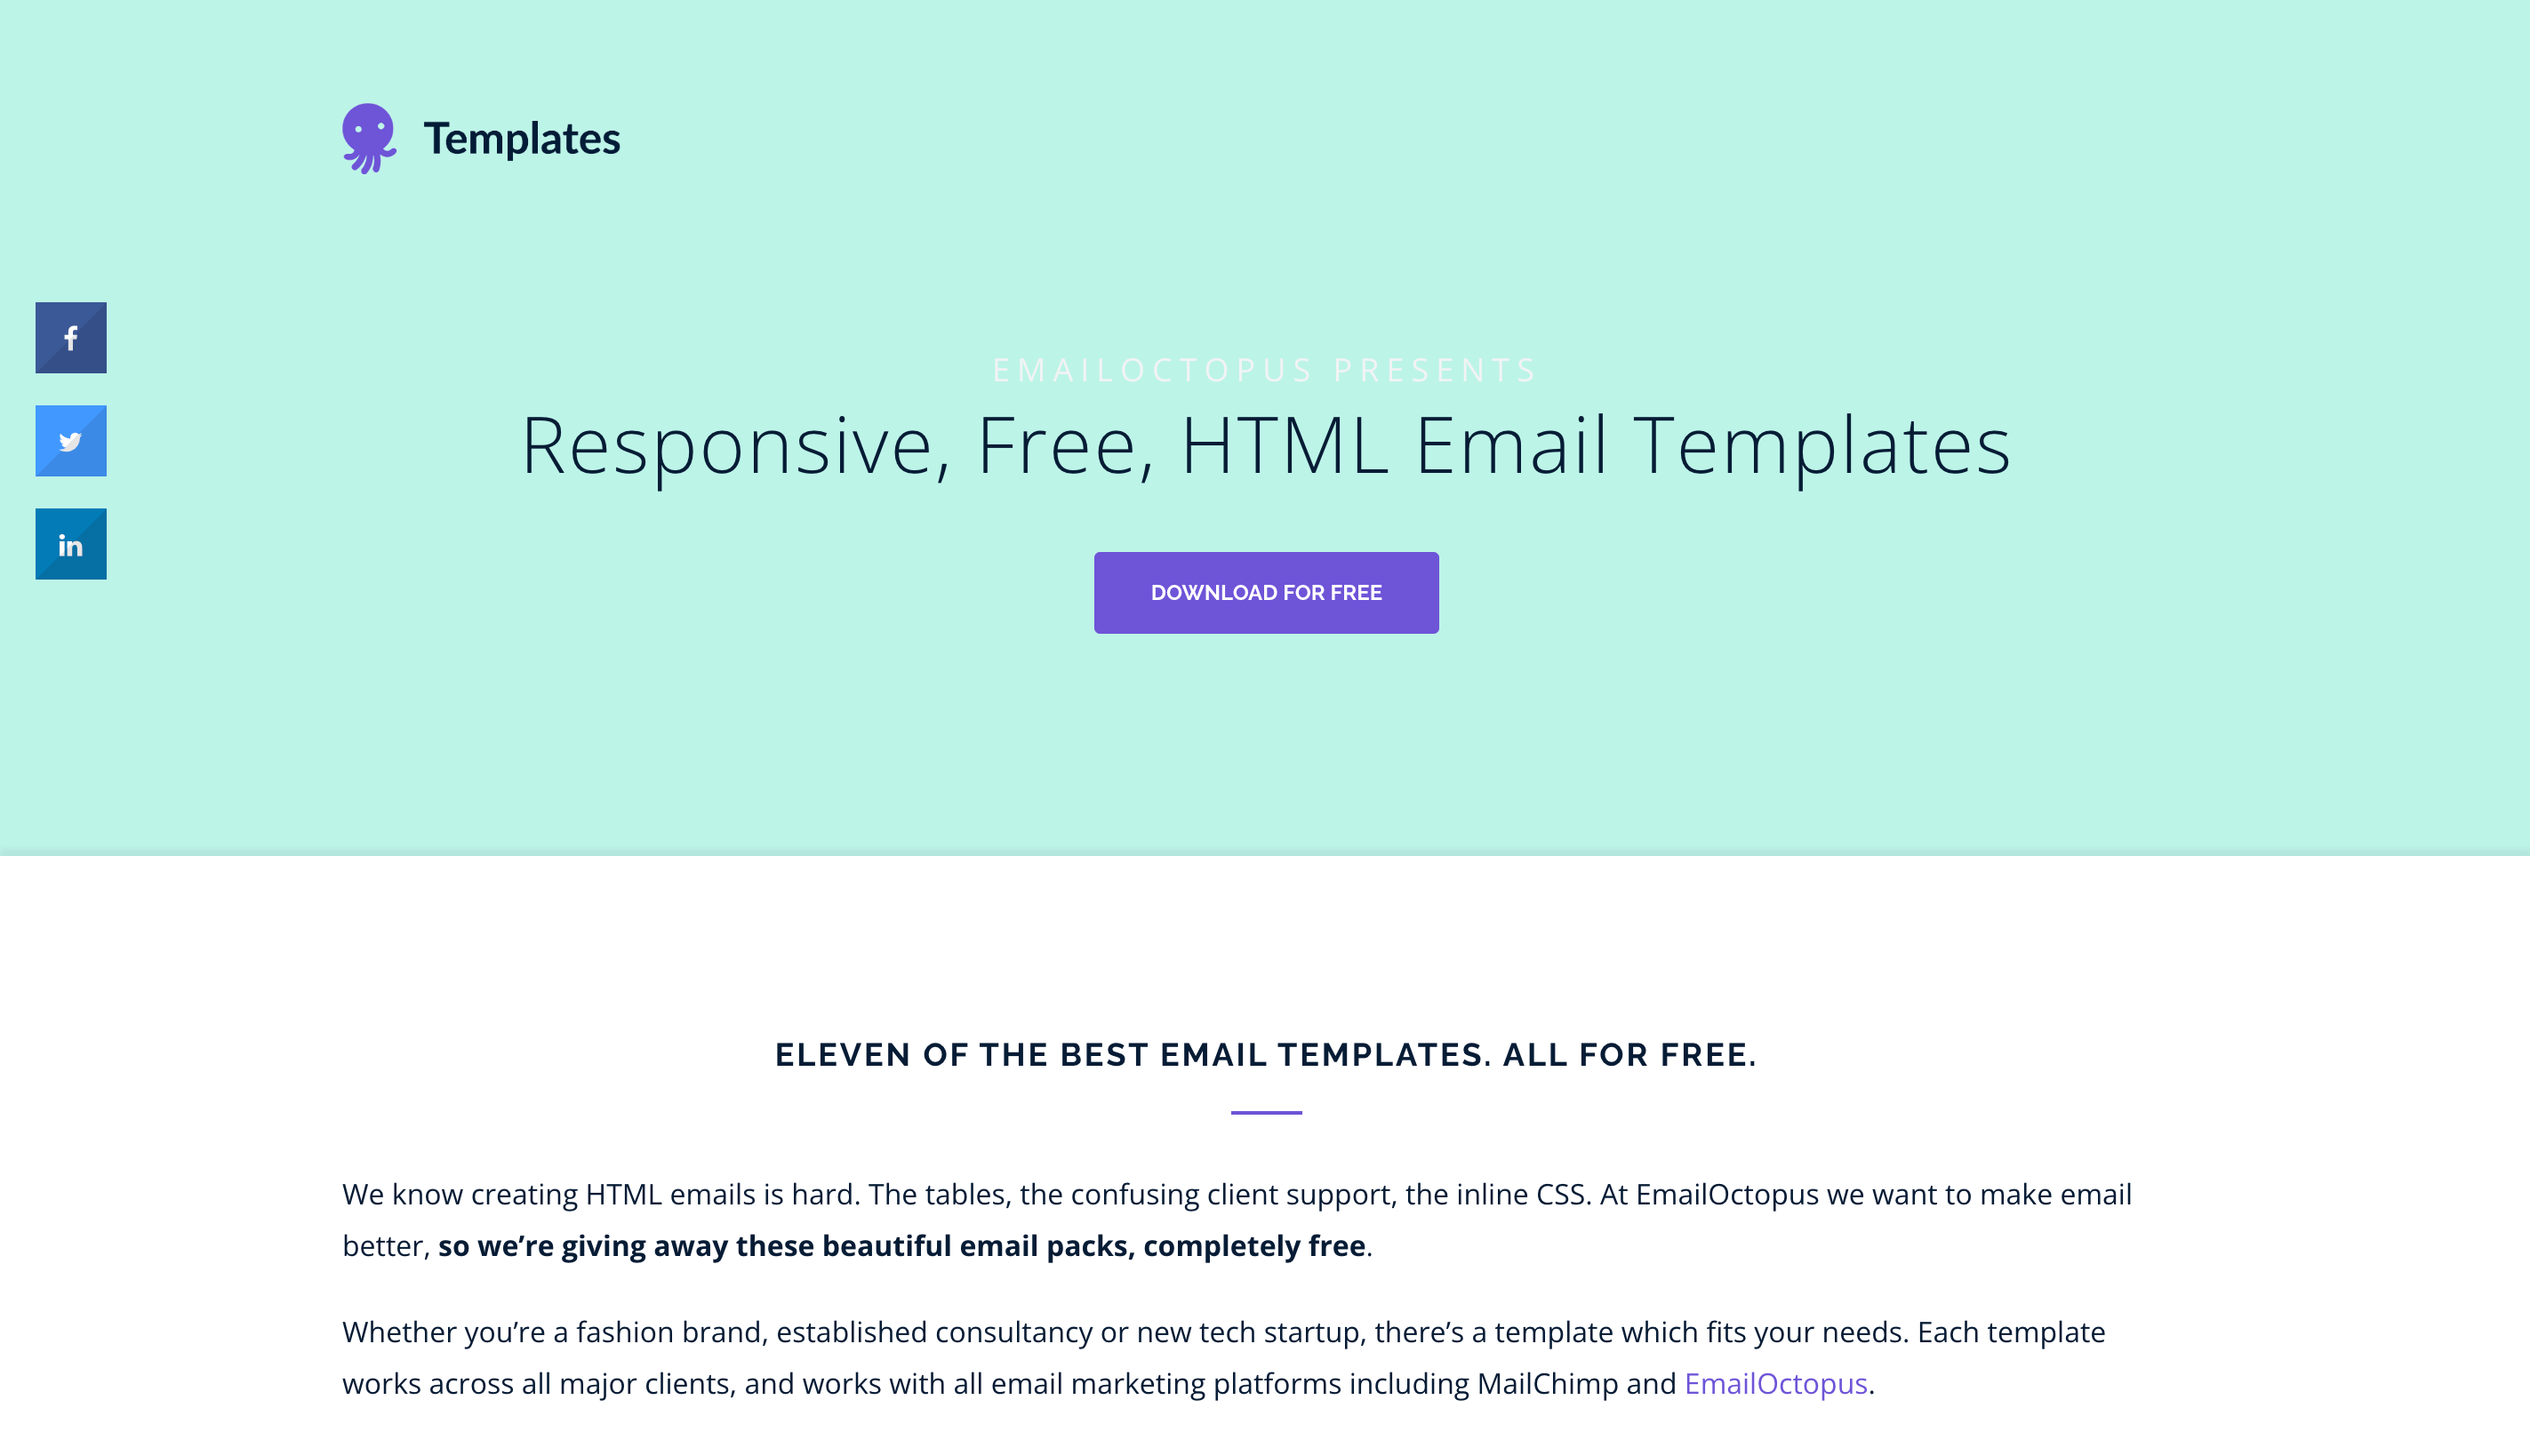 Free Email Templates by EmailOctopus